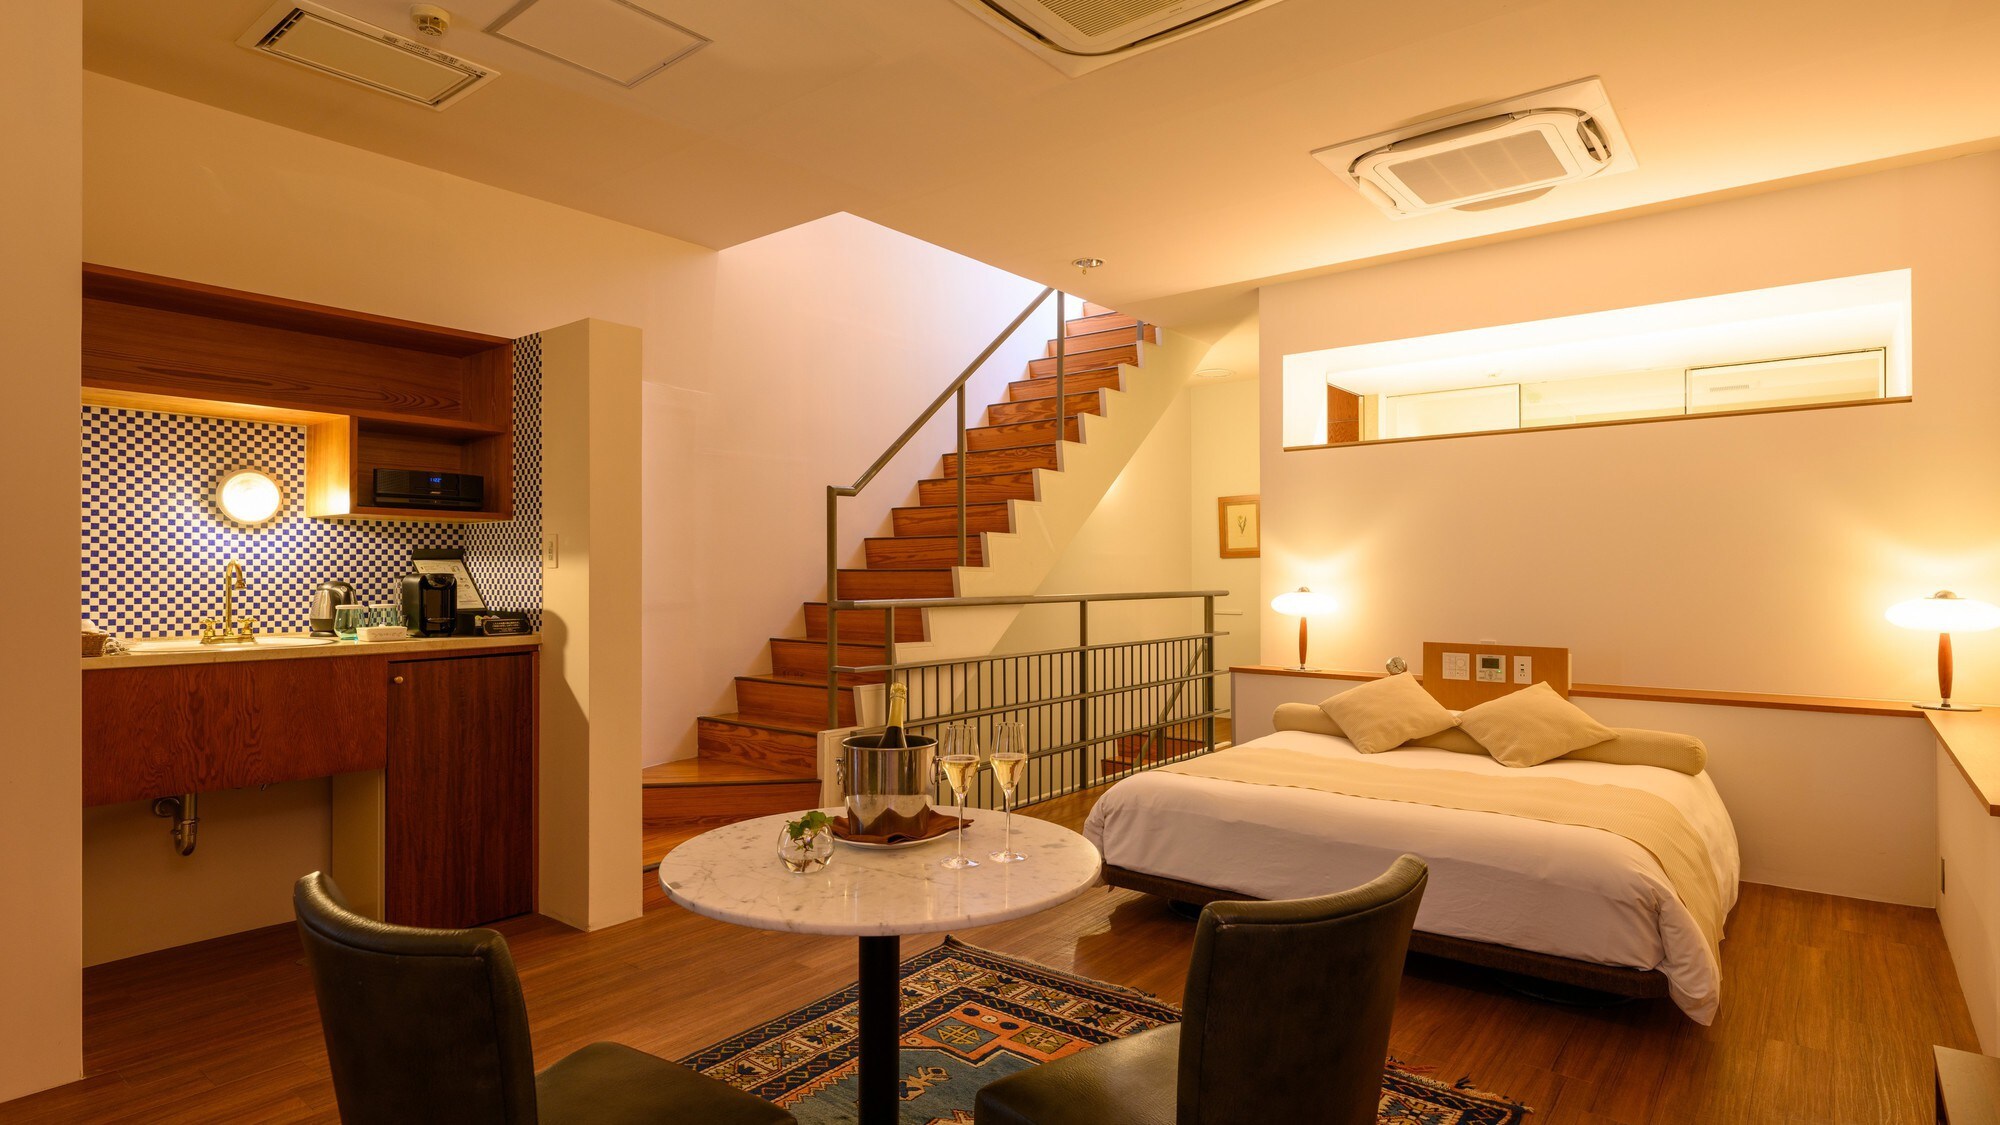 Main building double room * Main building 8 rooms "All rooms have open-air baths and private sauna rooms"!